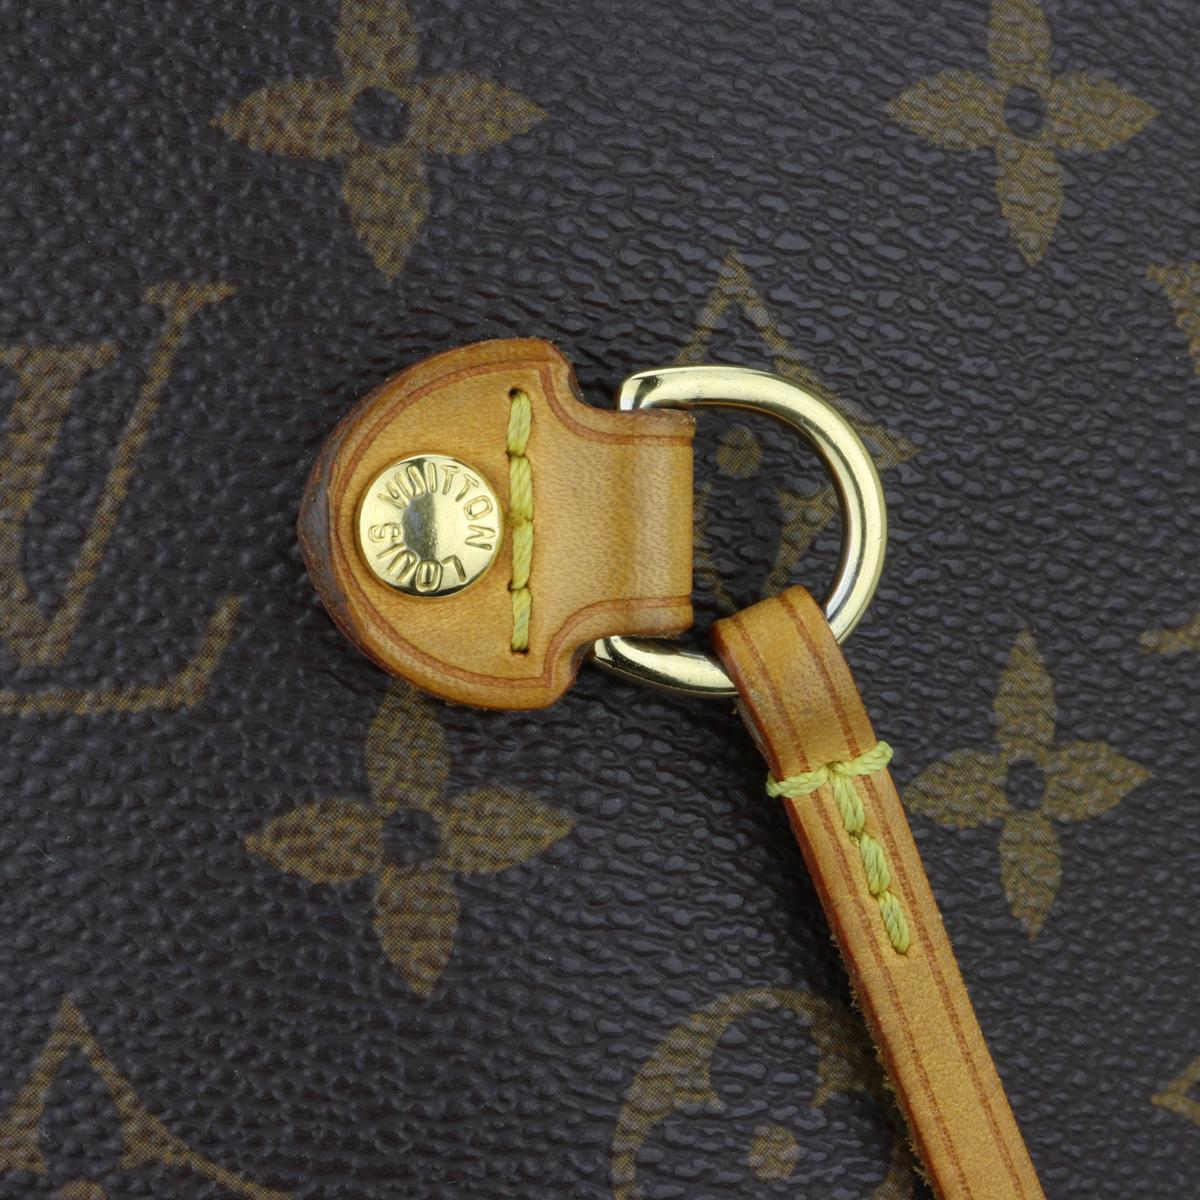 Louis Vuitton Neverfull GM Bag in Monogram with Beige Interior 2007 1